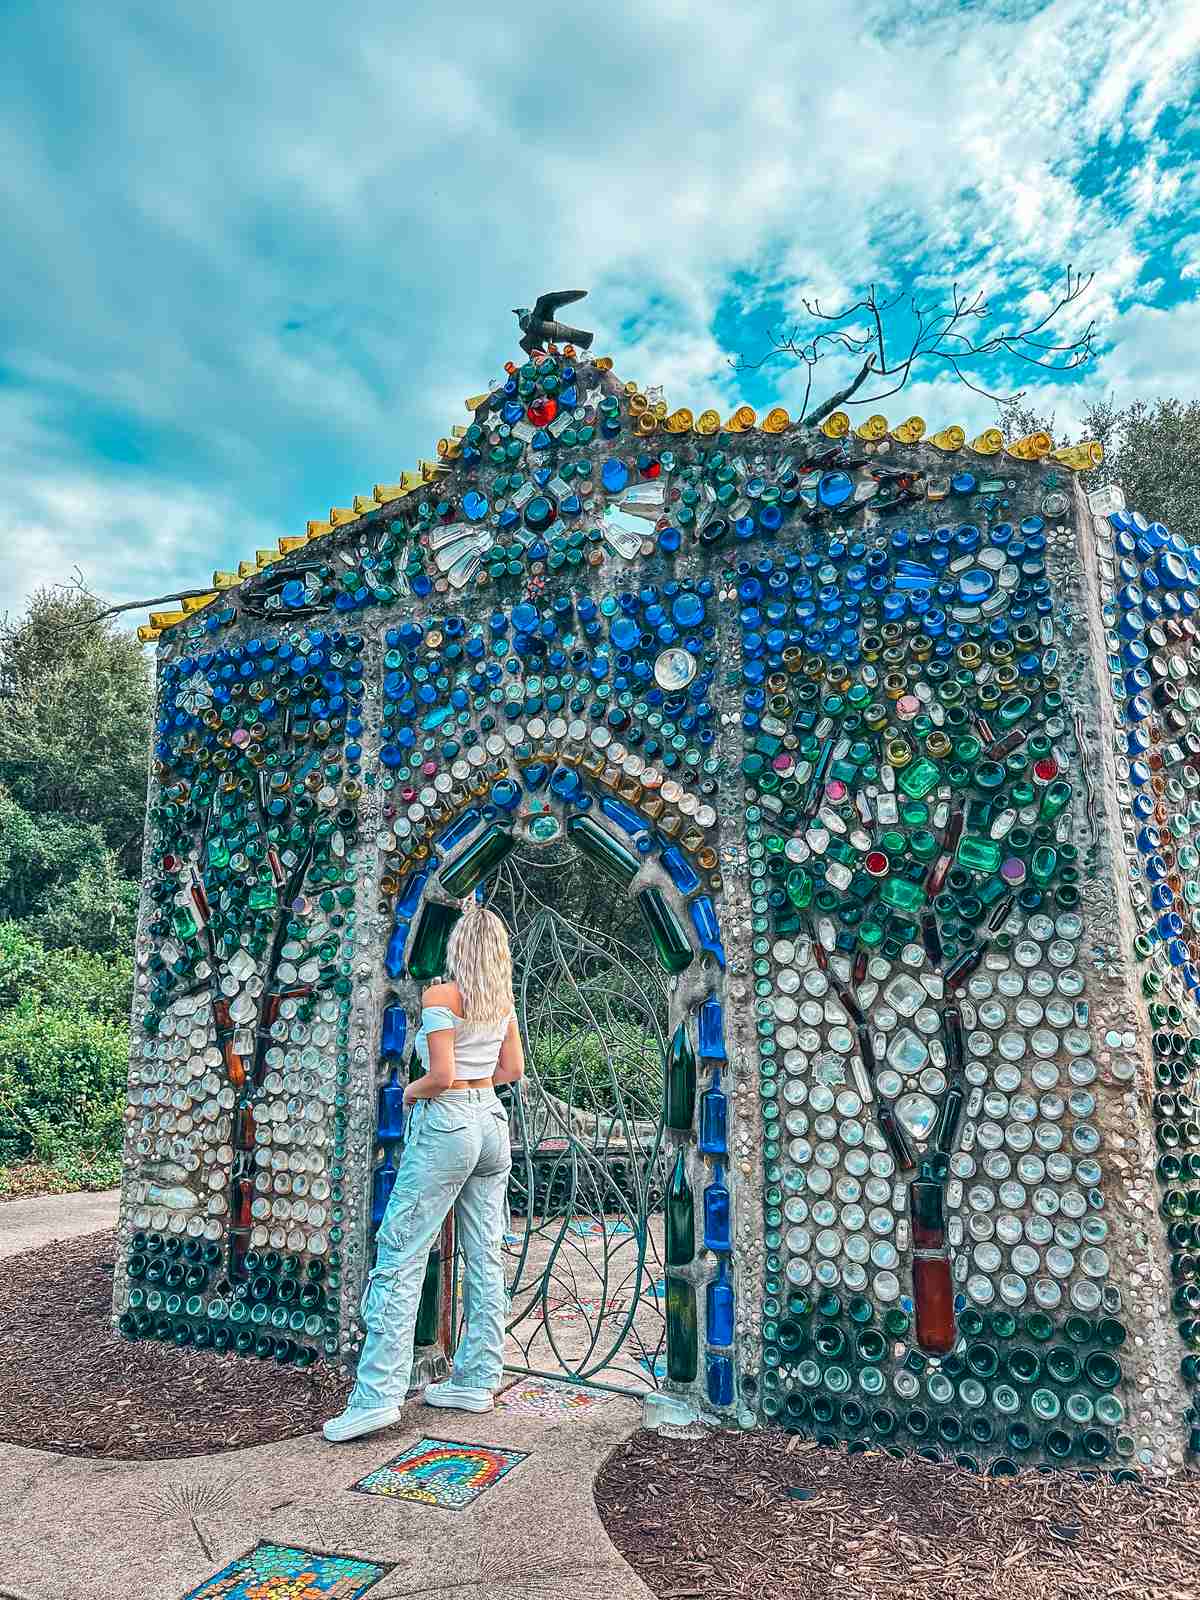 Bottle Chapel at Airlie Gardens in Wilmington